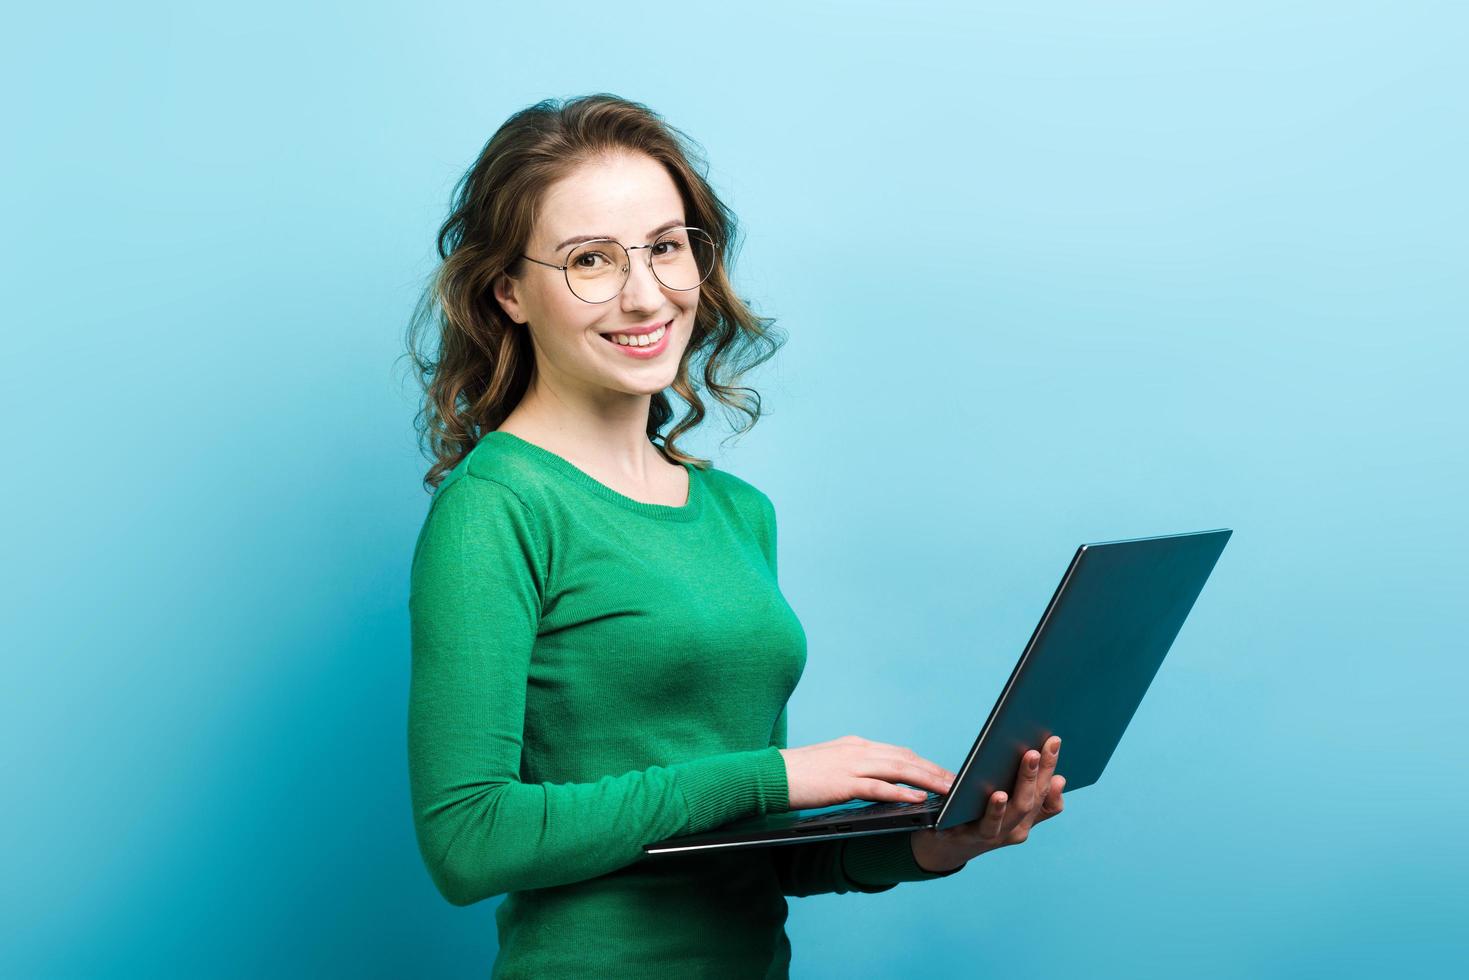 Portrait of pretty smiling curly  woman in glasses and wearing in green sweater holding a laptop photo